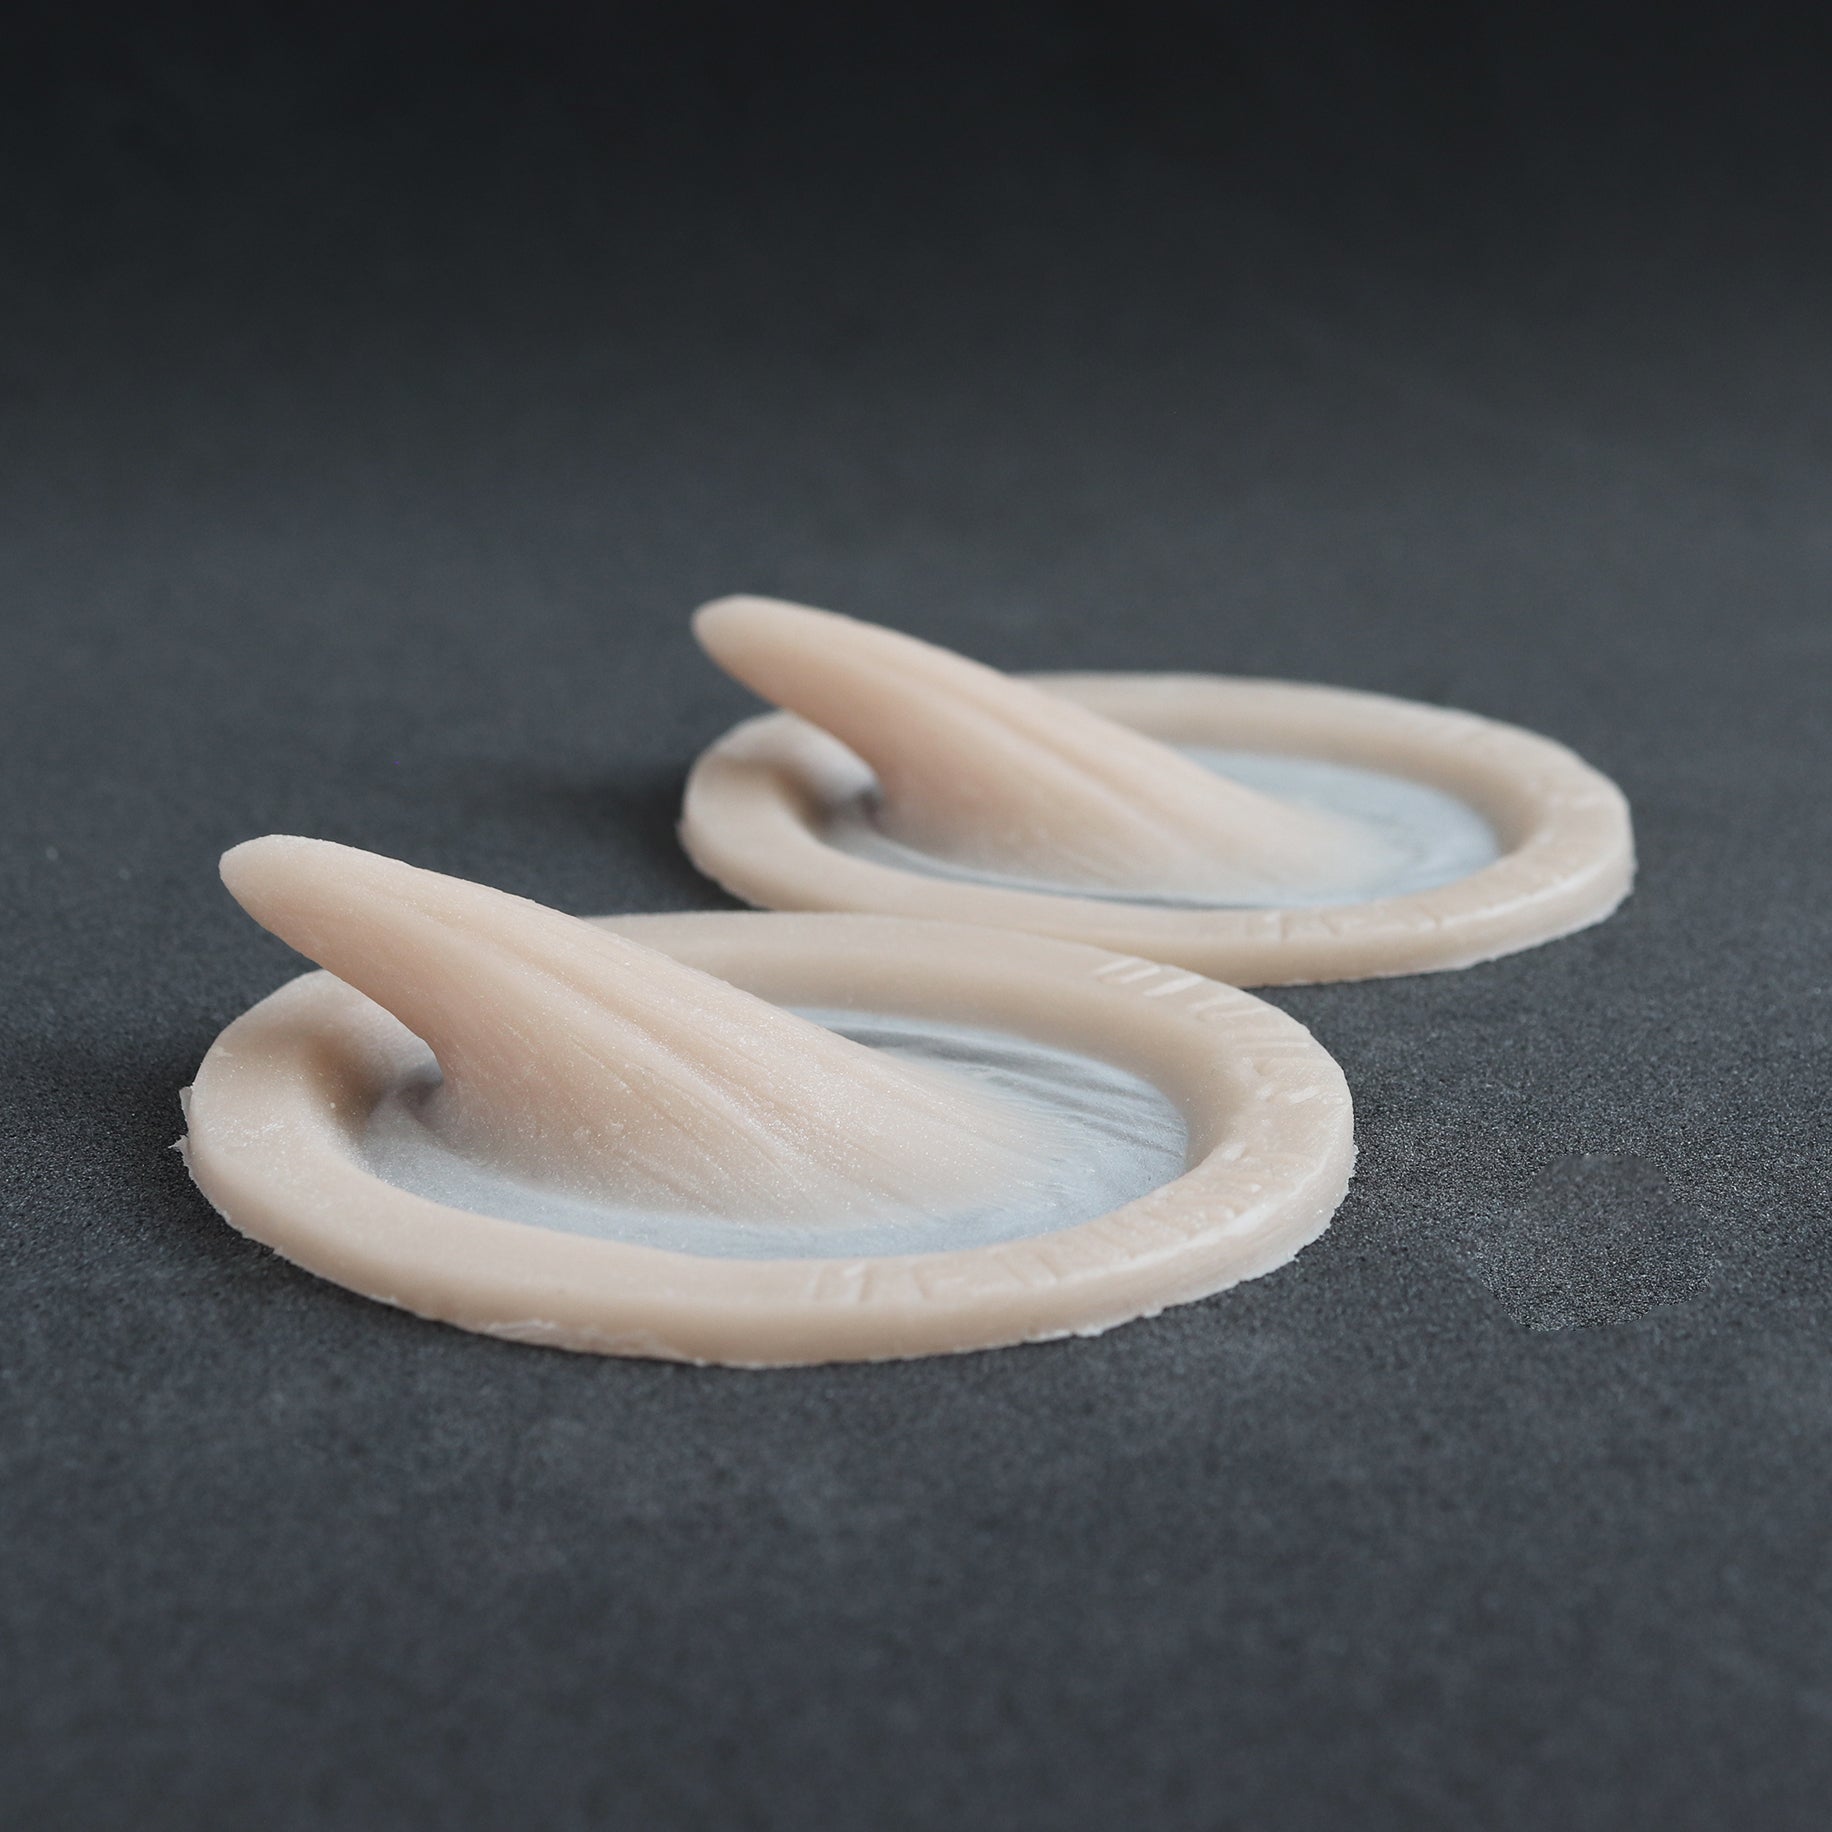 Small Vertical Horns (Pair) - Silicone makeup prosthetic in vanilla shade on a black surface